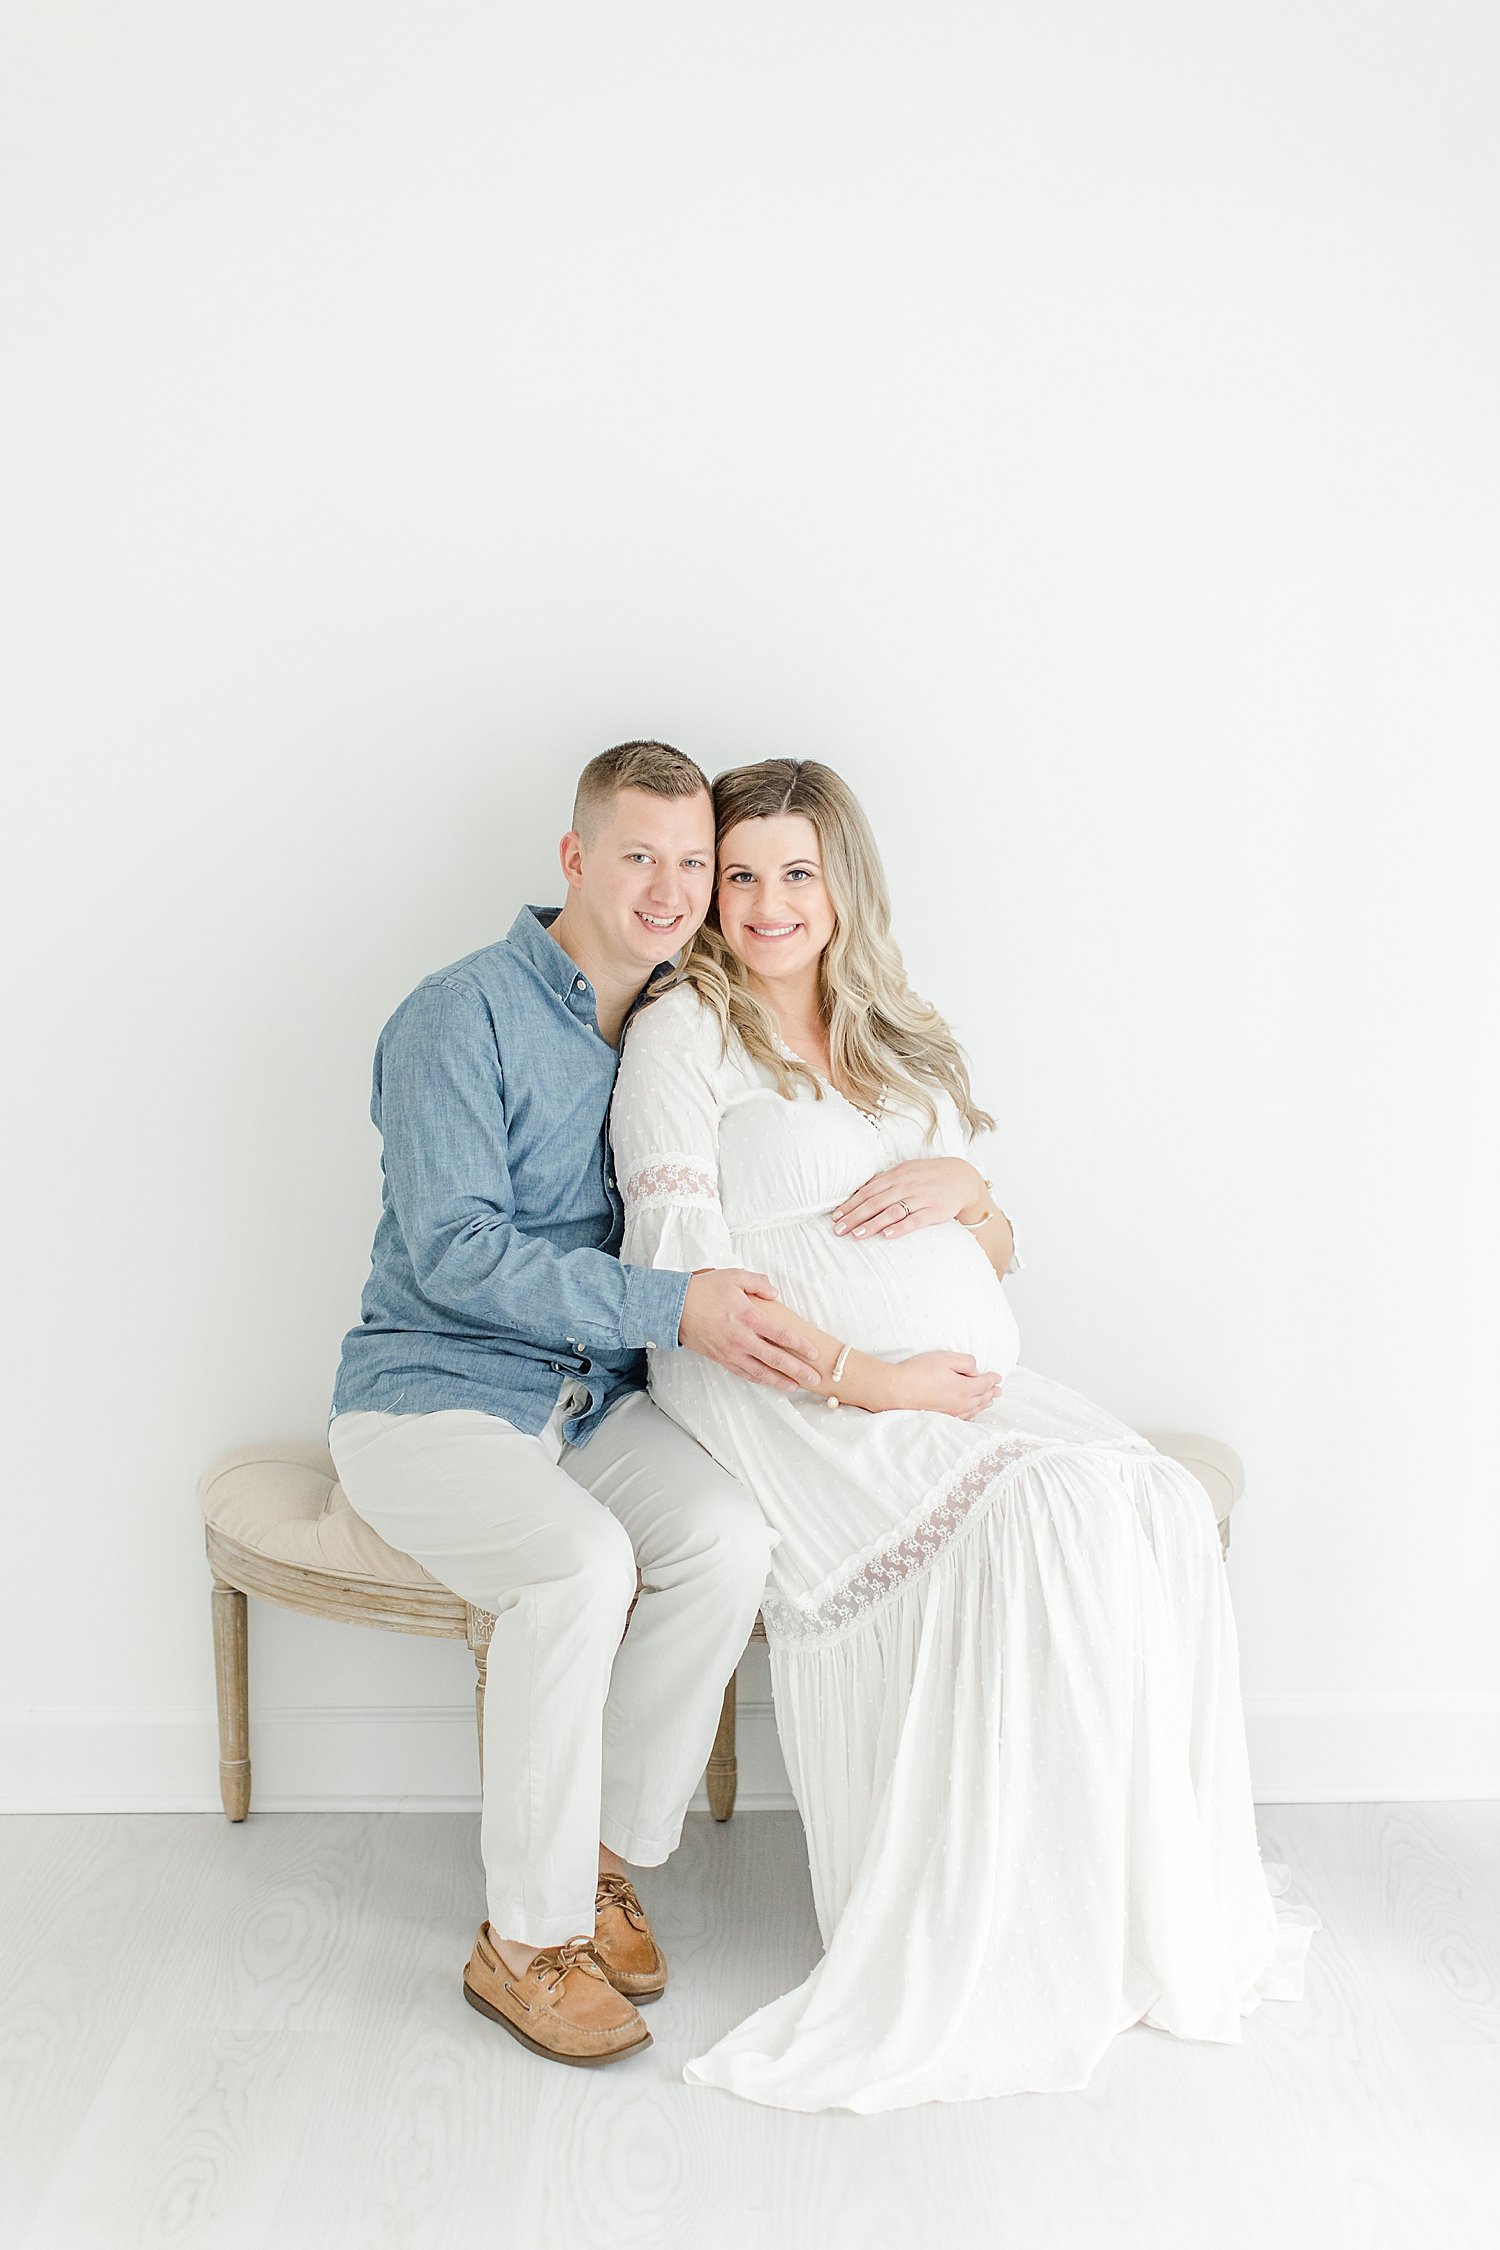 Expecting parents sitting for maternity photos | Kristin Wood Photography